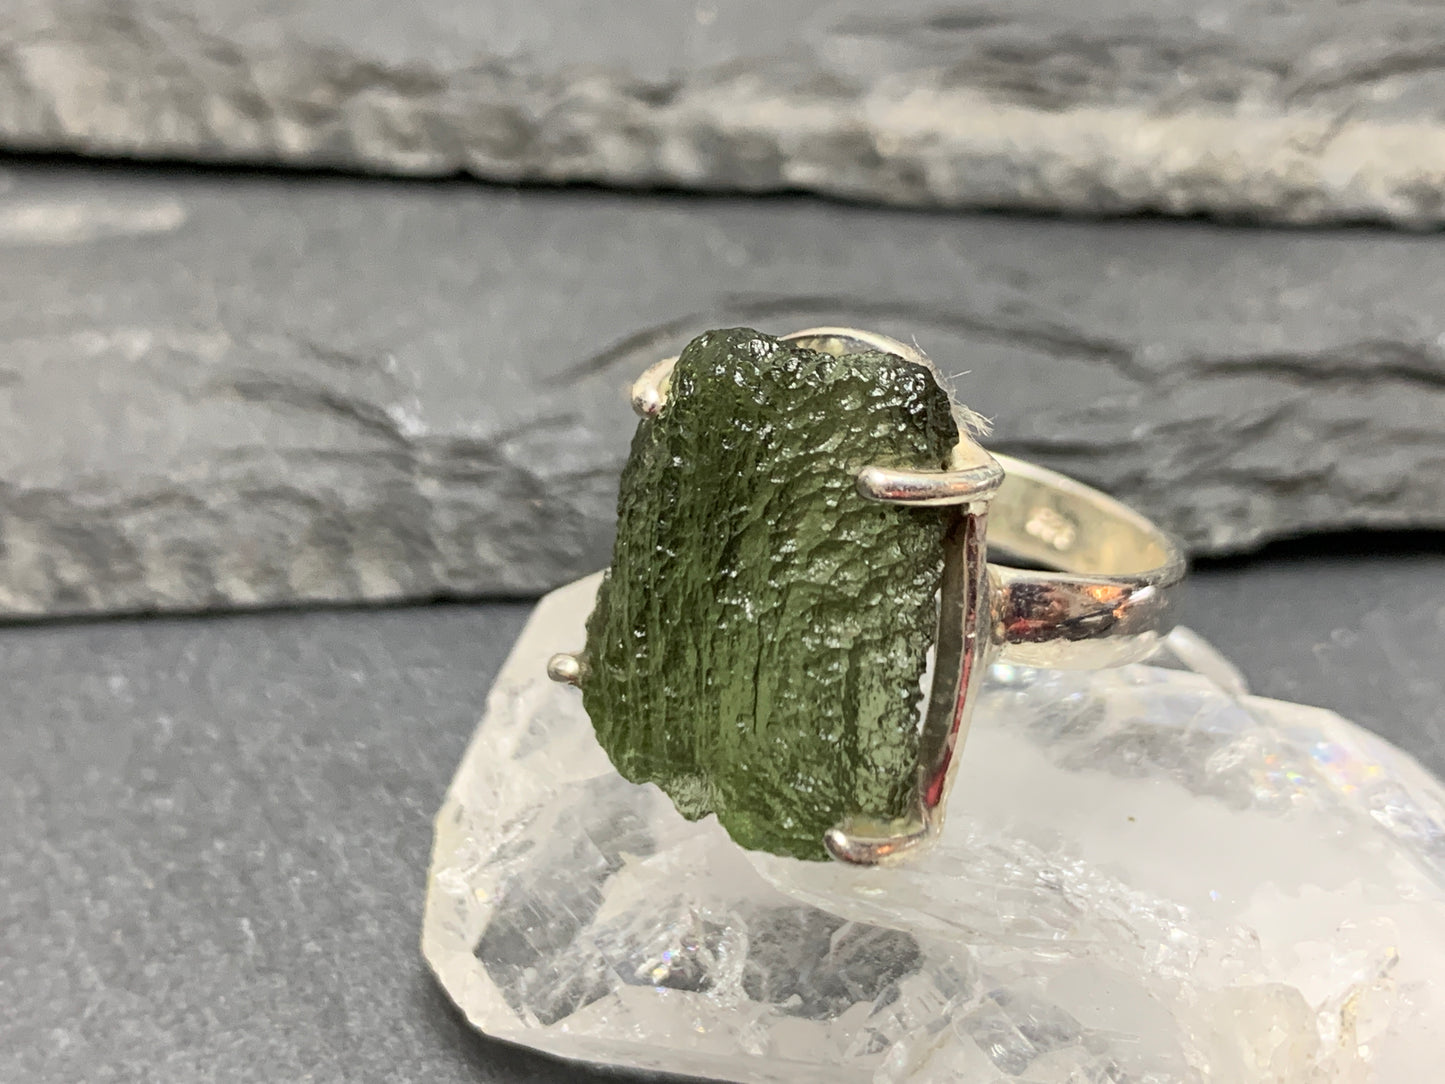 " Altair" Ring with Rough Moldavite 5.75 US